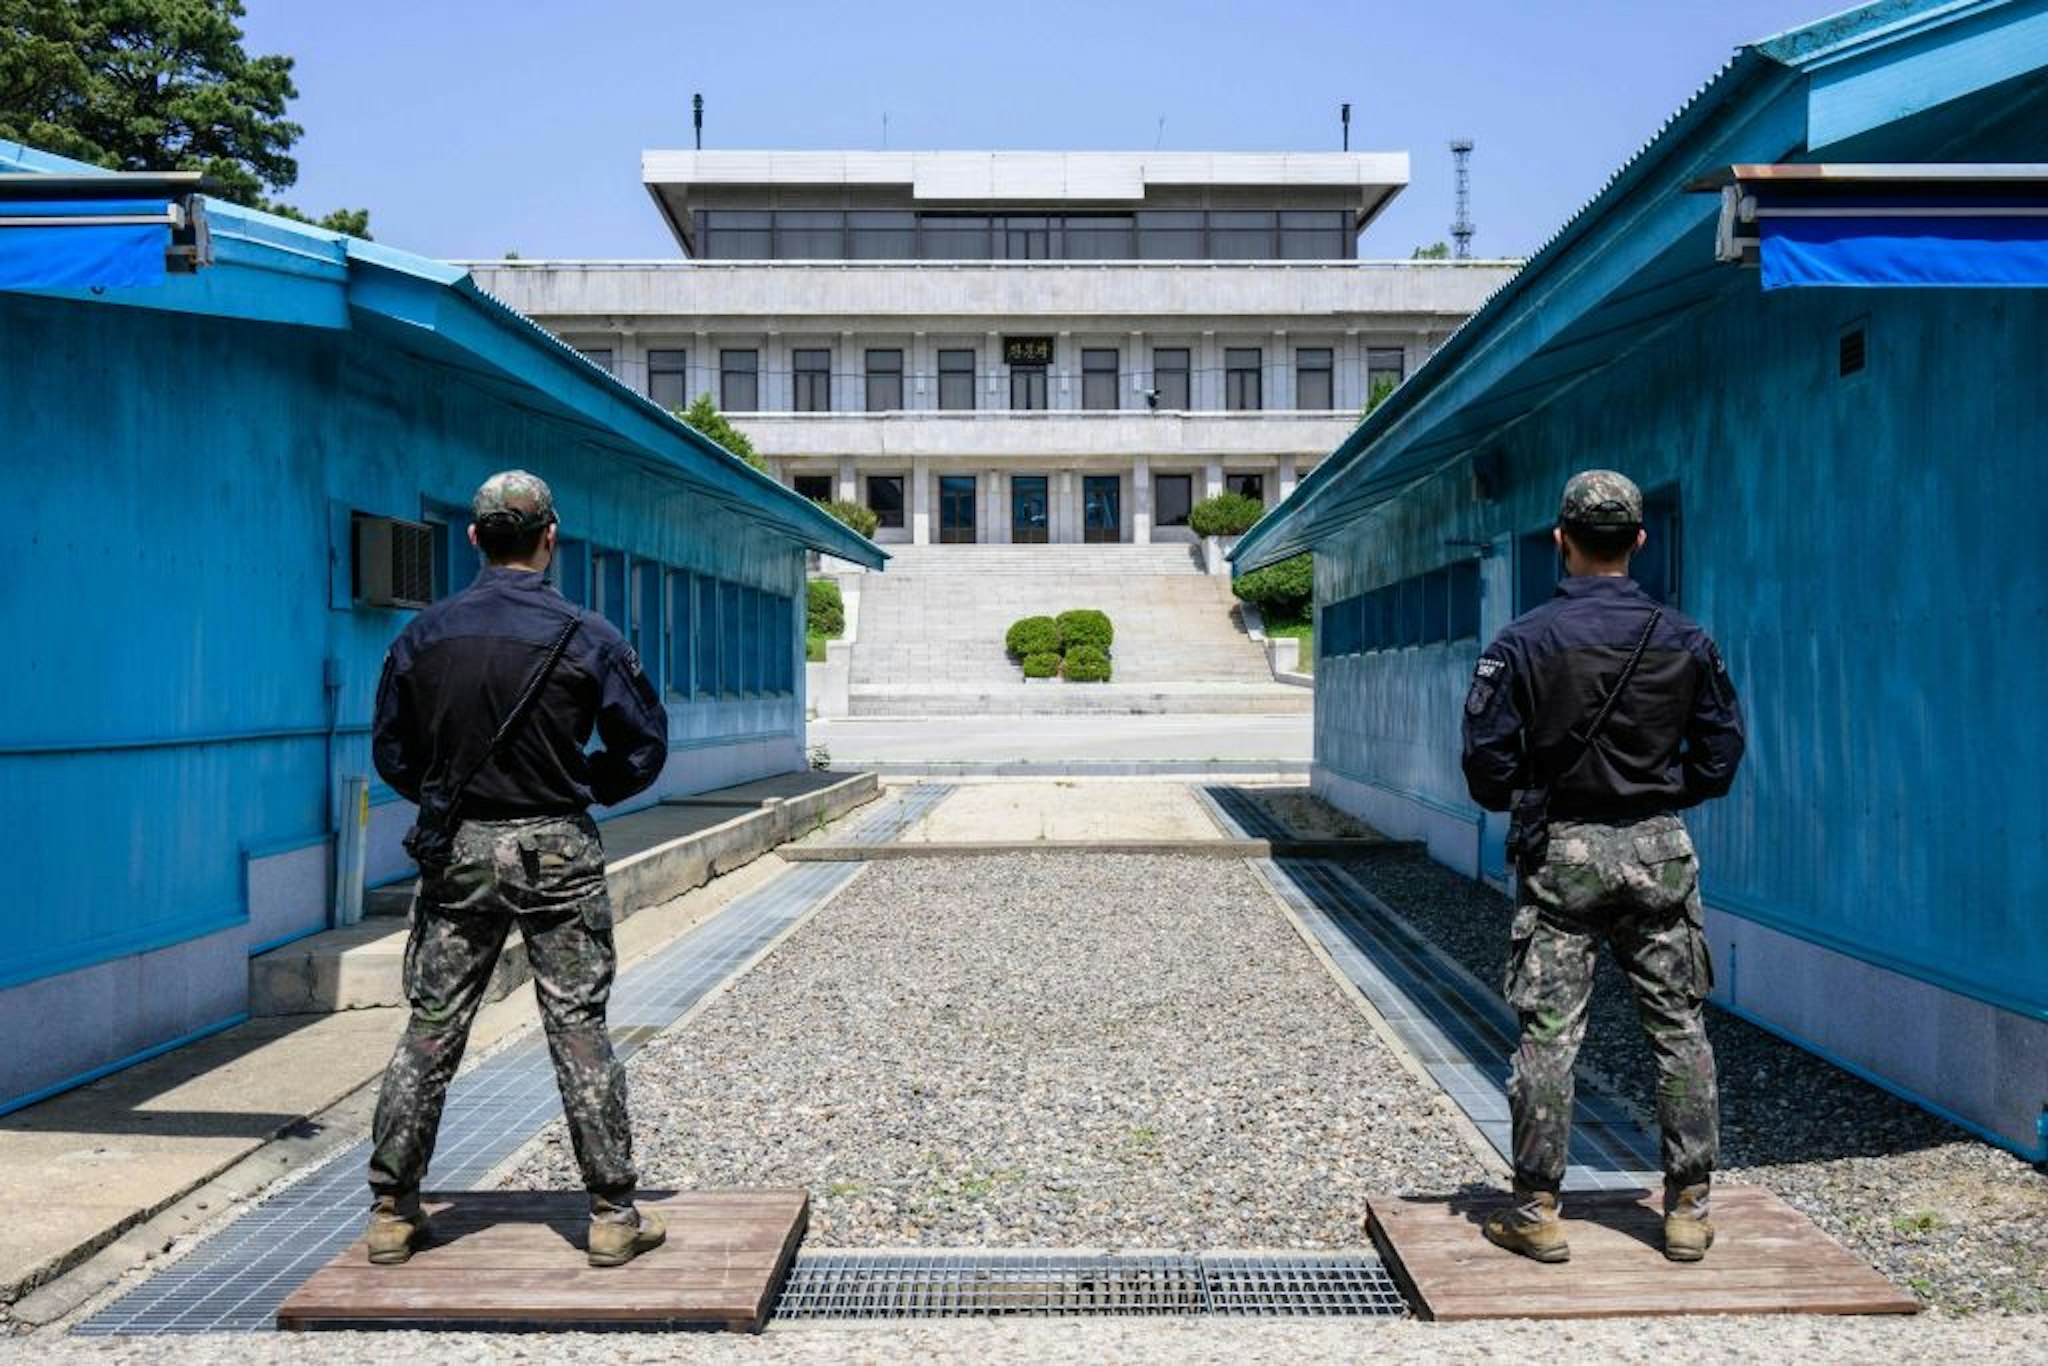  Two soldiers stand guard at the DMZ between North and South Korea, a line of blue propaganda balloons in the foreground.